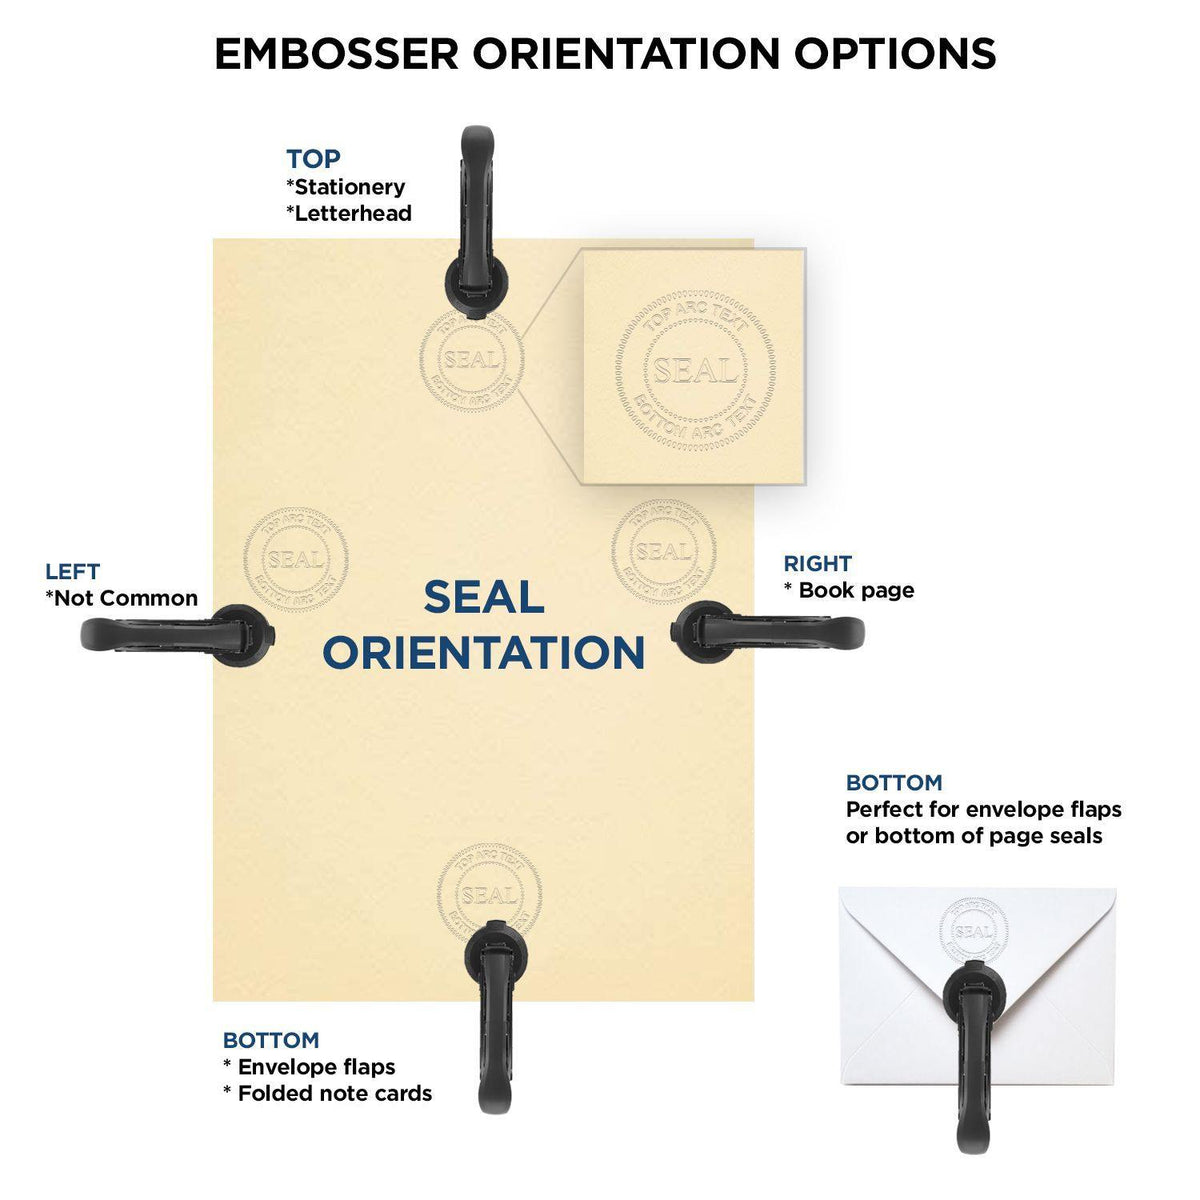 Geologist Soft Seal Embosser - Engineer Seal Stamps - Embosser Type_Handheld, Embosser Type_Soft Seal, Type of Use_Professional